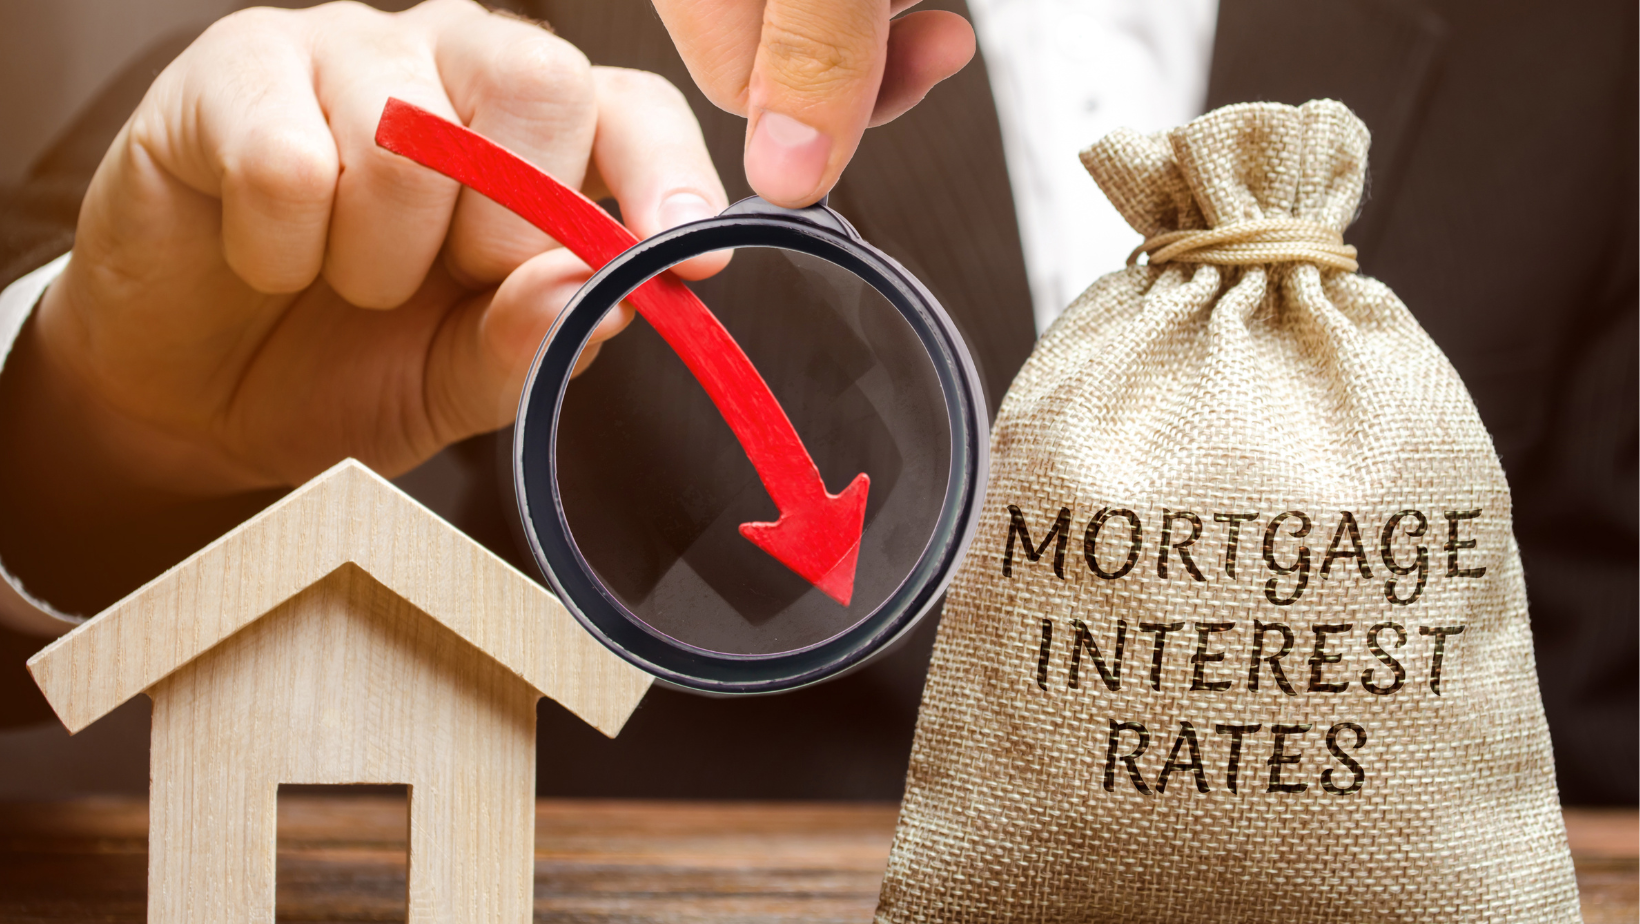 What to avoid when interest rates are high?